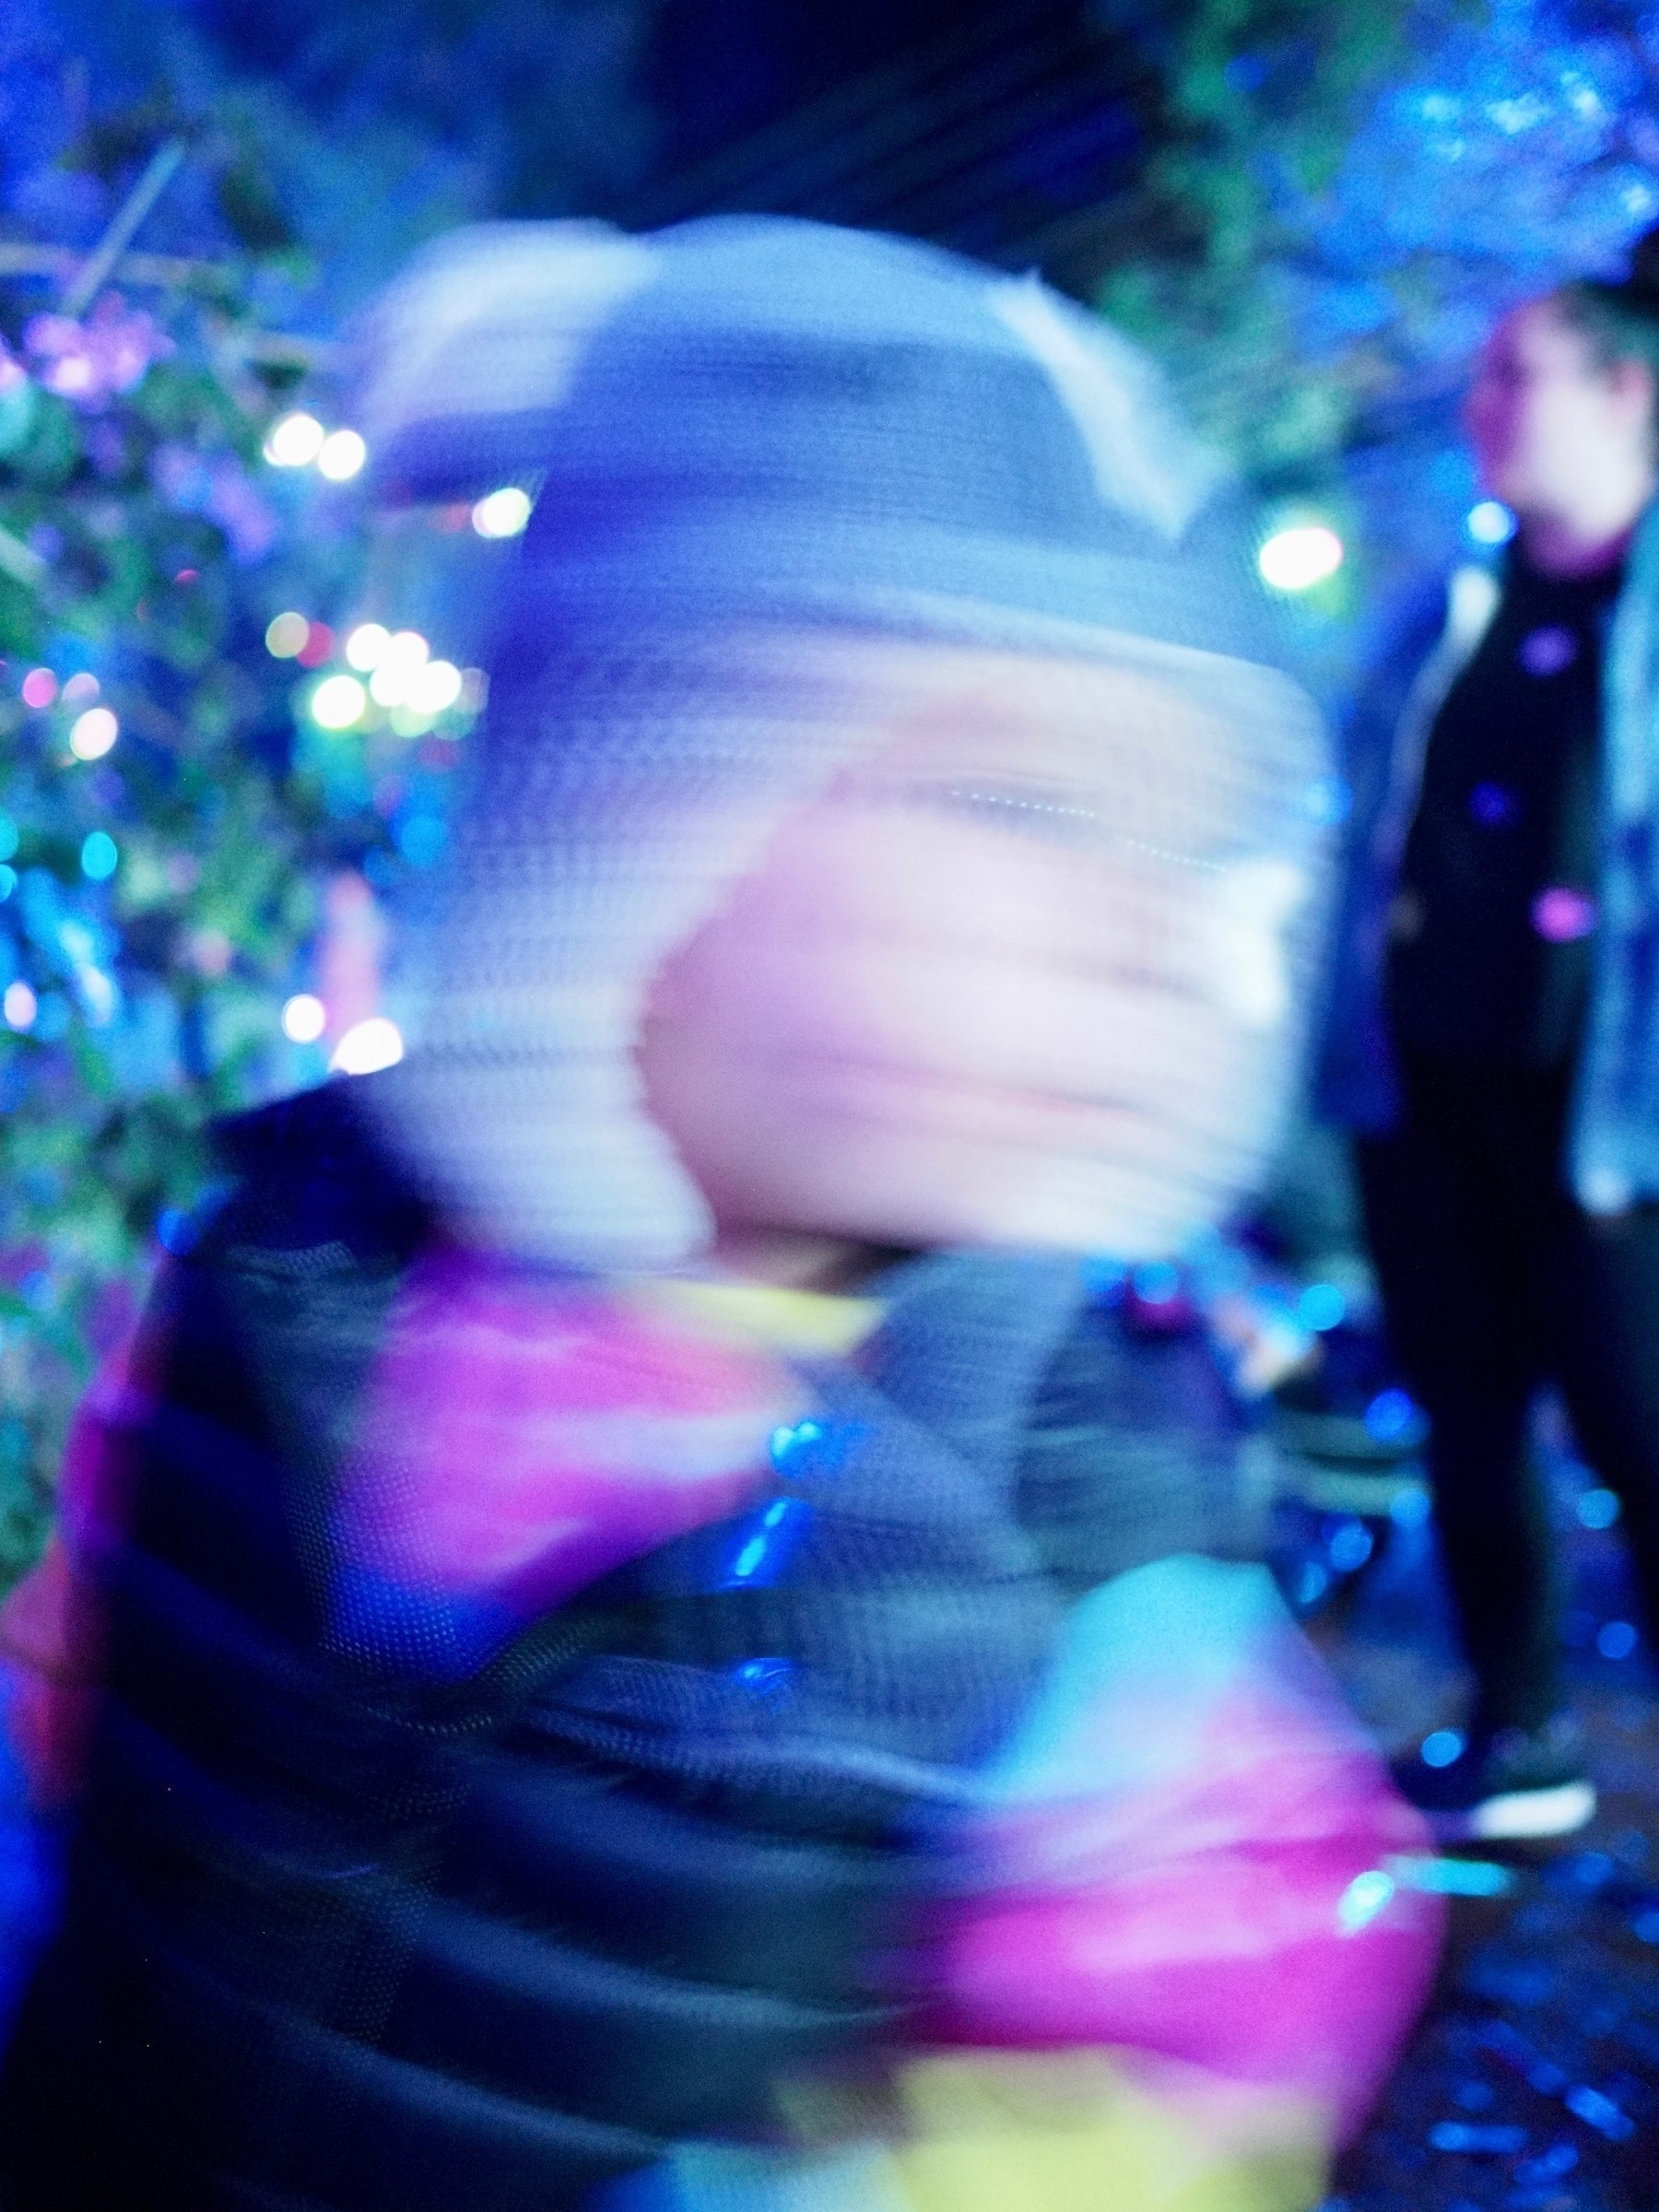 Blurred child moving, captured with slow shutter speed